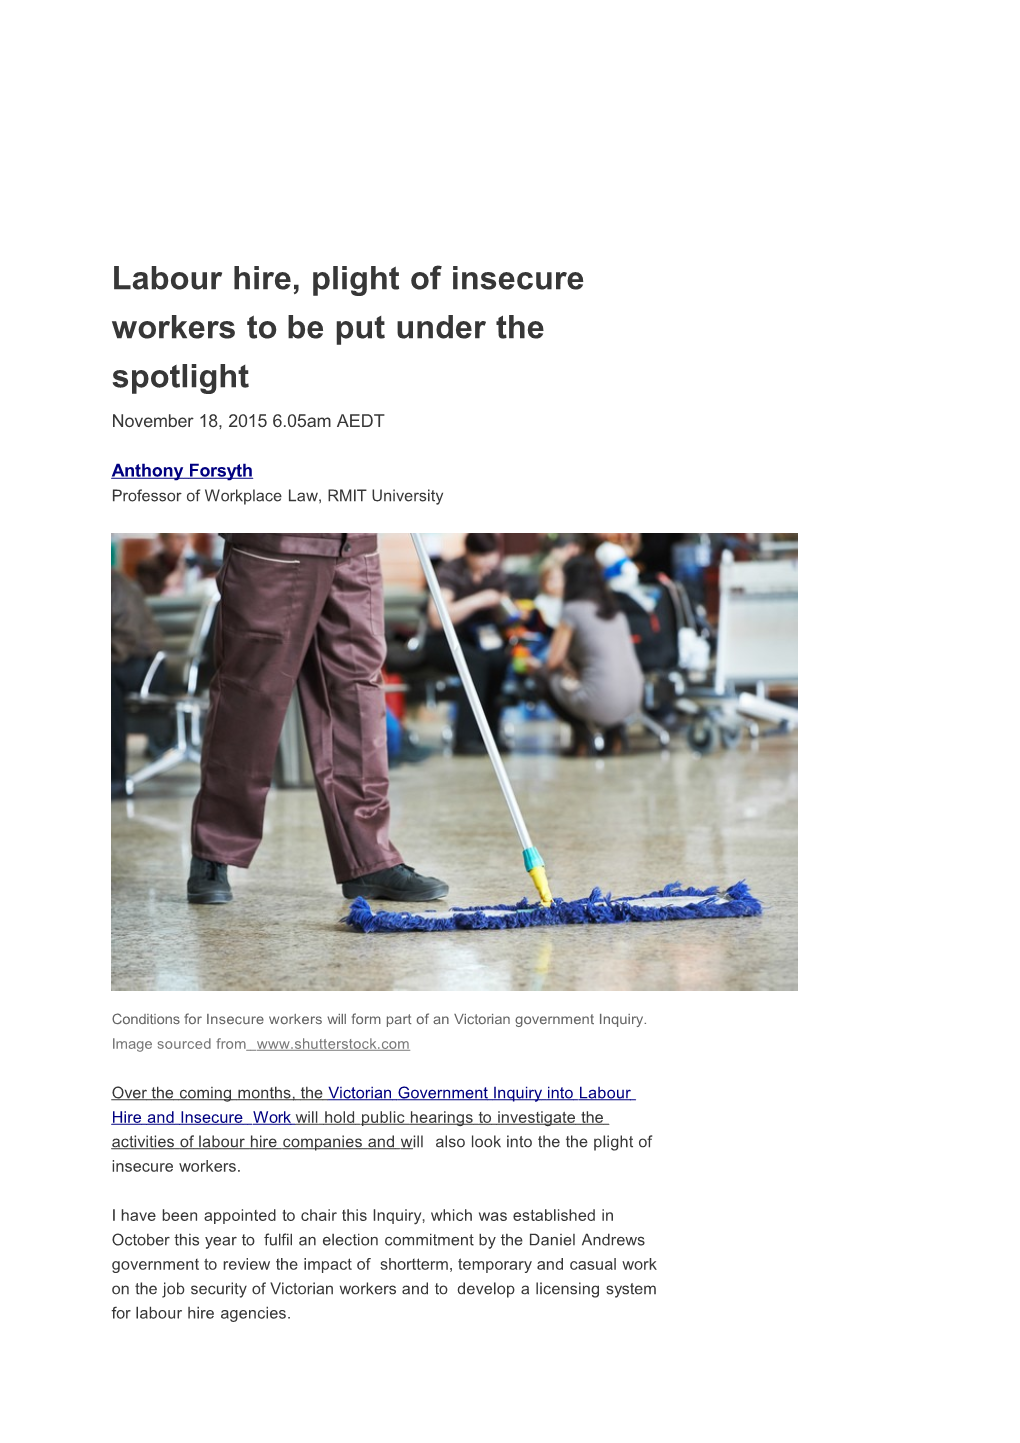 Labour Hire, Plight of Insecure Workers to Be Put Under the Spotlight